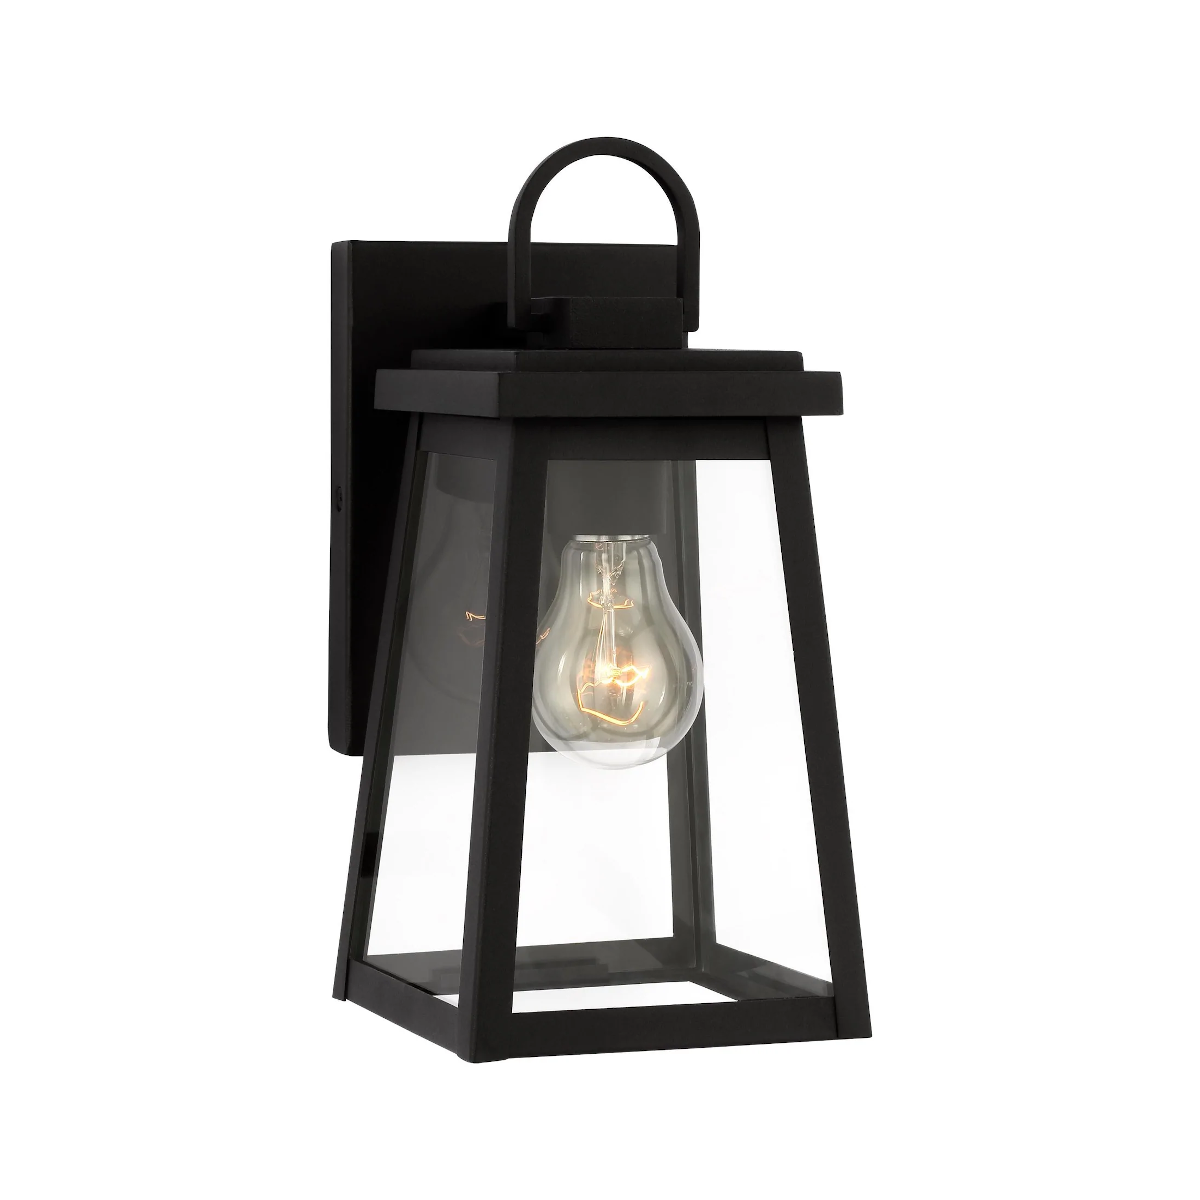 8548401-12 Founder Small Black Wall Lantern with Clear Glass